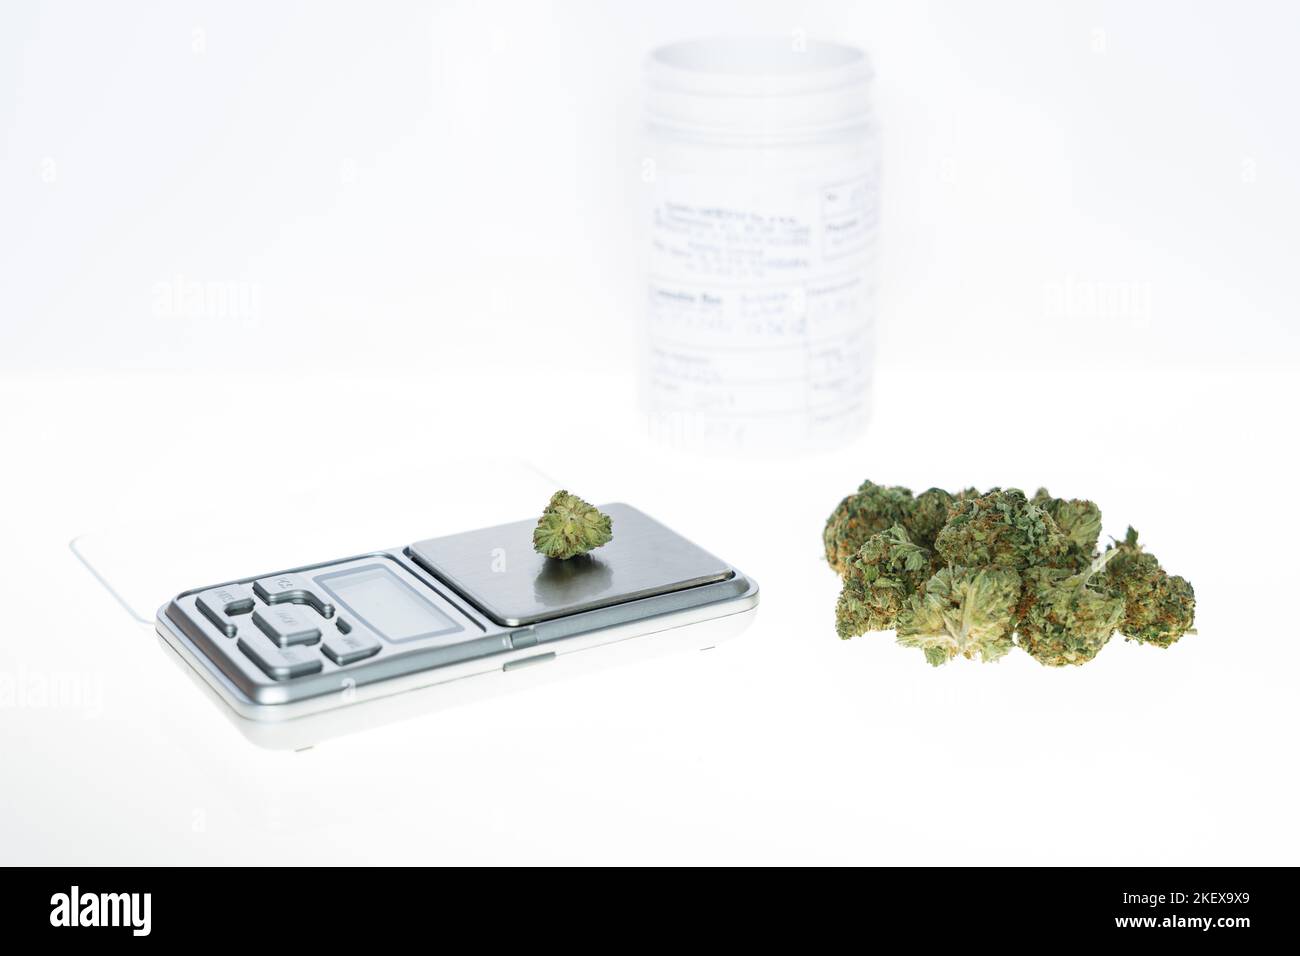 Cannabis flos, medical marijuana pile next to precision scale and white container, safe way to take medicine Stock Photo